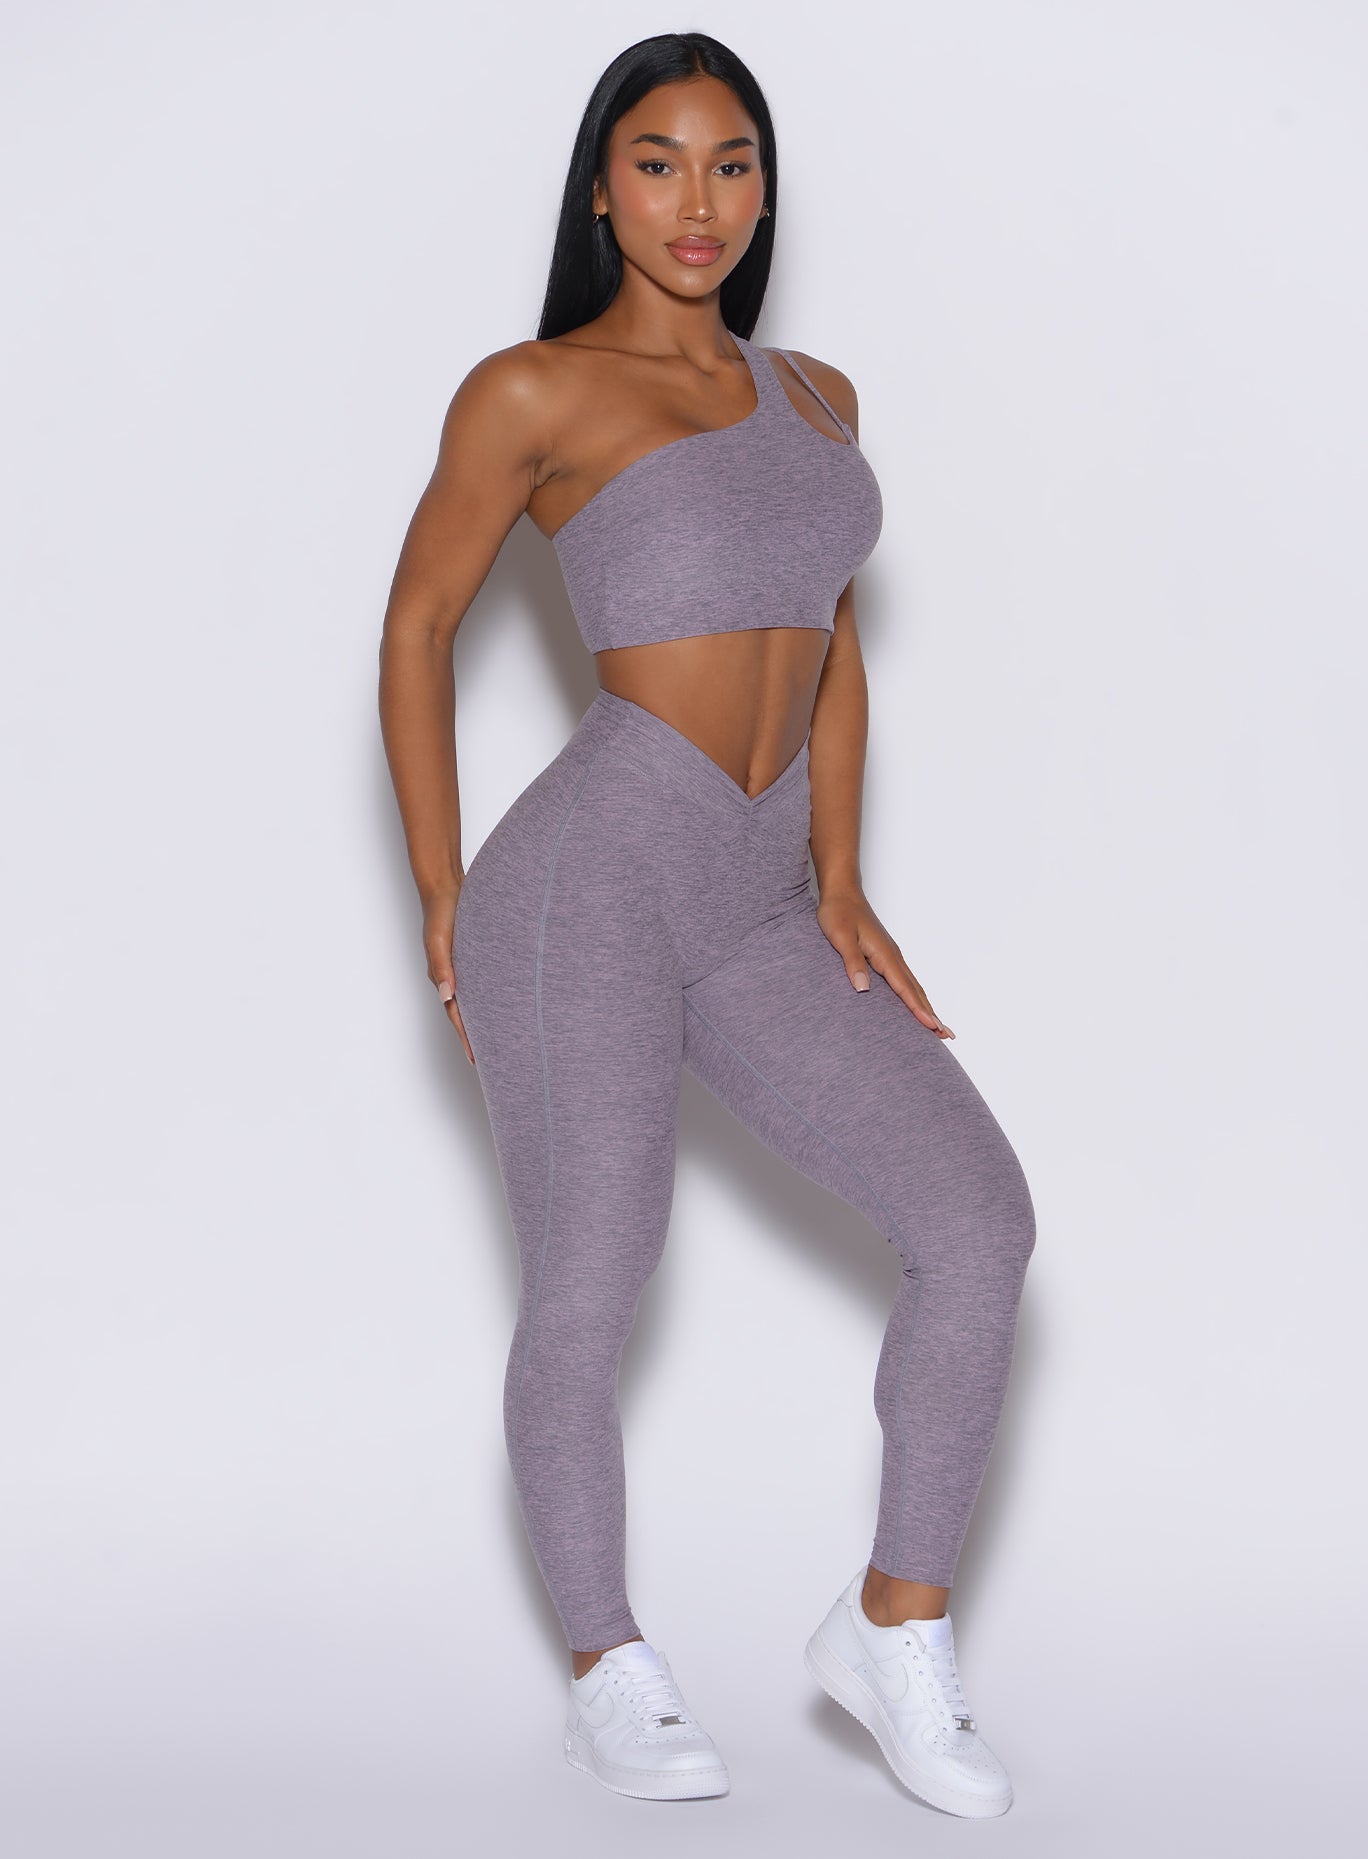 right side profile view of a model angled right wearing our V Active Leggings in lilac gray color along with the matching top